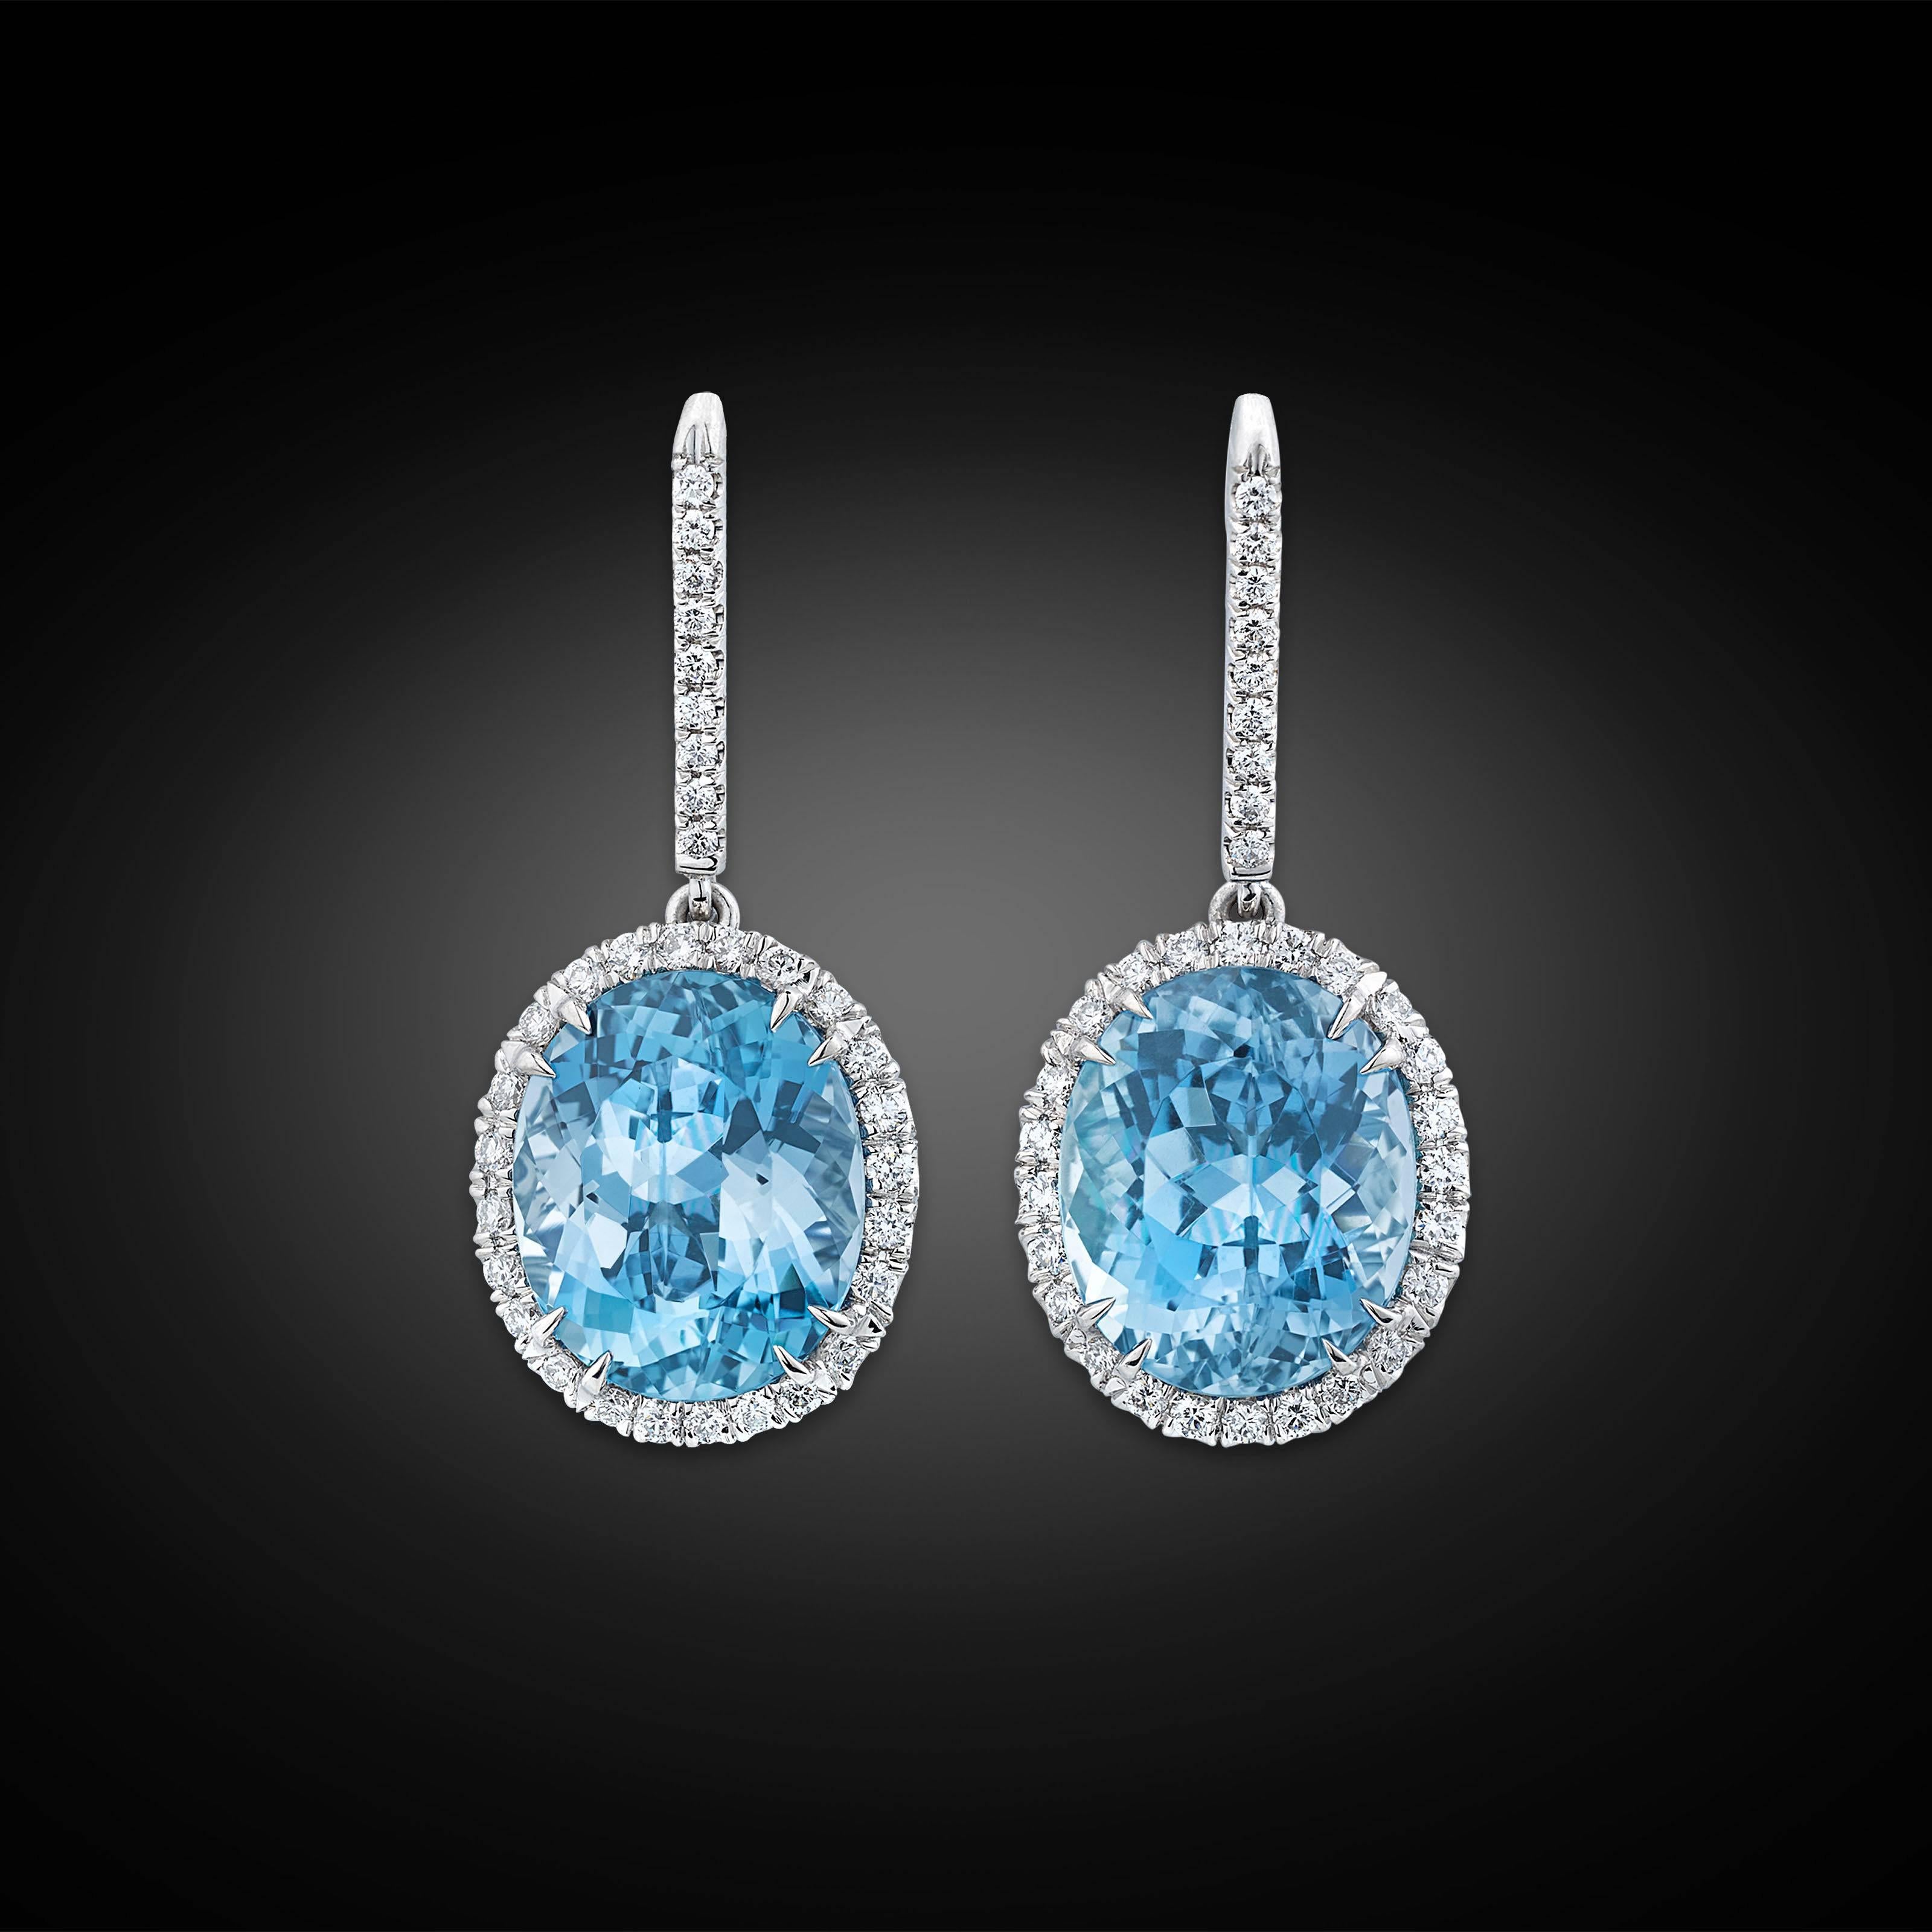 A pair of enchanting aquamarines dangle elegantly in these classic drop earrings. Weighing approximately 9.47 total carats, the perfectly matched gems display the crystal clear ocean-blue hue that make these exquisite stones so appealing. The lovely